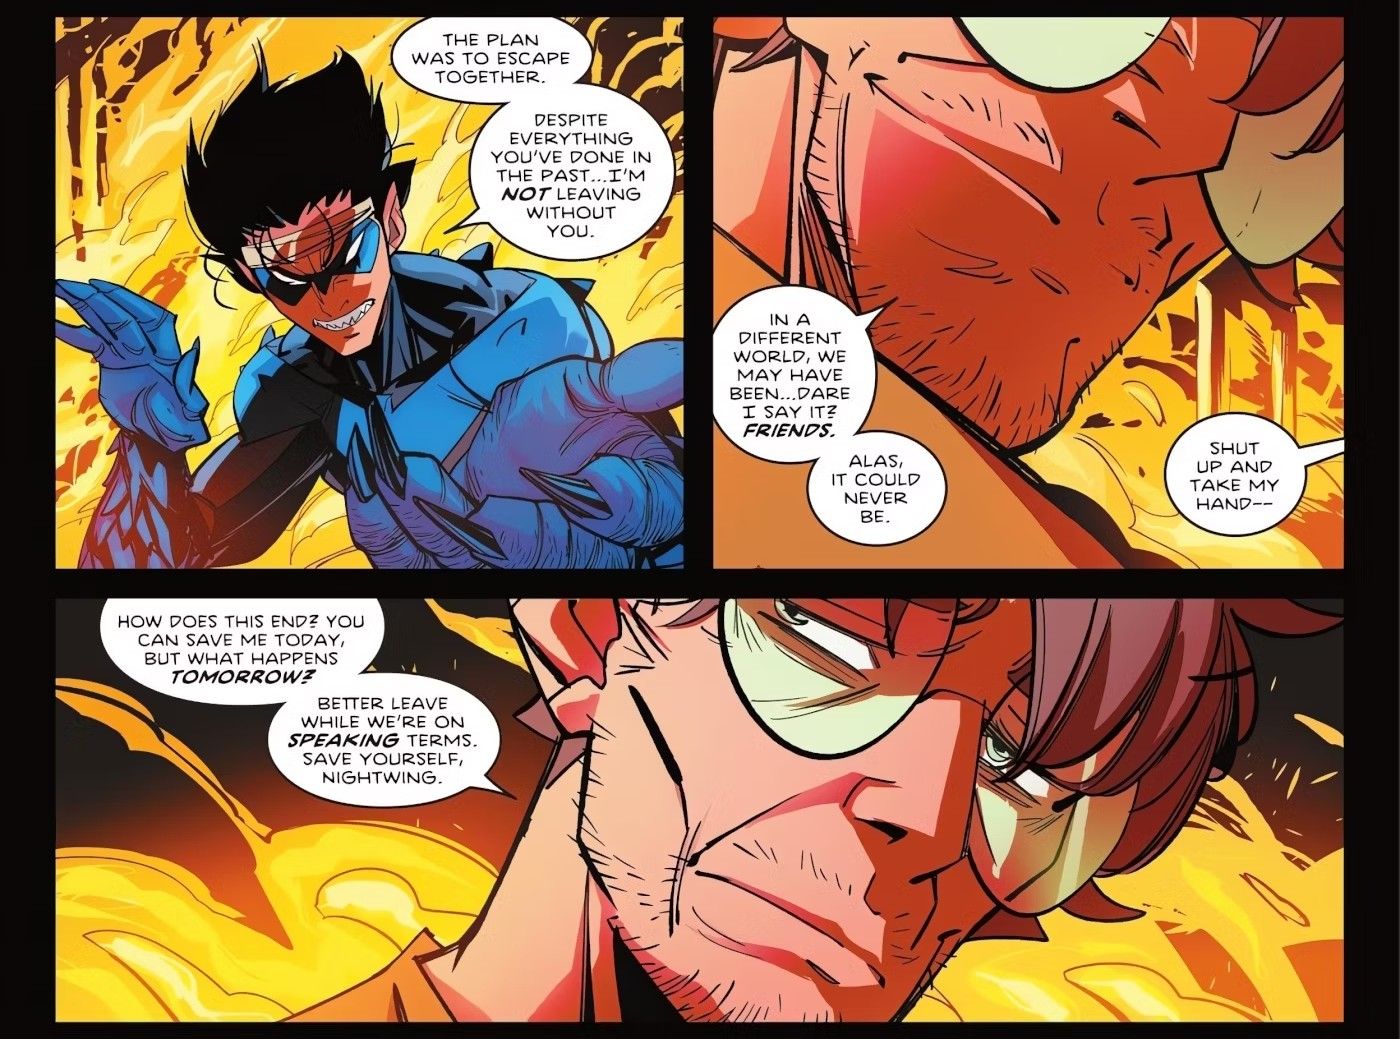 Nightwing Returns to Save Scarecrow from a Fire